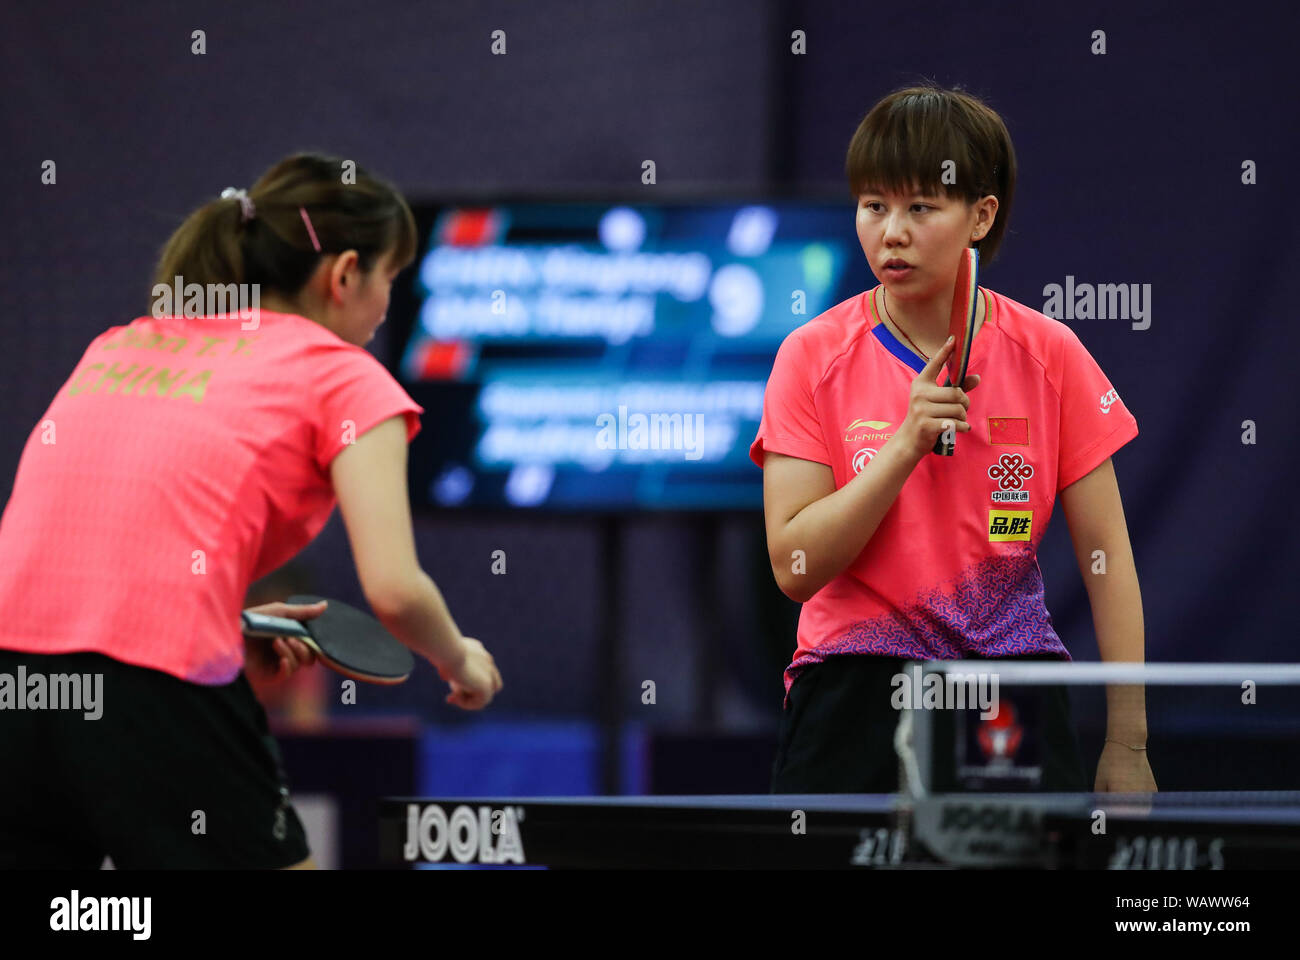 Olomouc, Czech Republic. 22nd Aug, 2019. Chen Xingtong (R)/Qian Tianyi of China compete during a women's doubles round of 16 match against Stephanie Loeuillette/Audrey Zarif of France during 2019 ITTF Czech Open in Olomouc, the Czech Republic, Aug. 22, 2019. Credit: Shan Yuqi/Xinhua/Alamy Live News Stock Photo